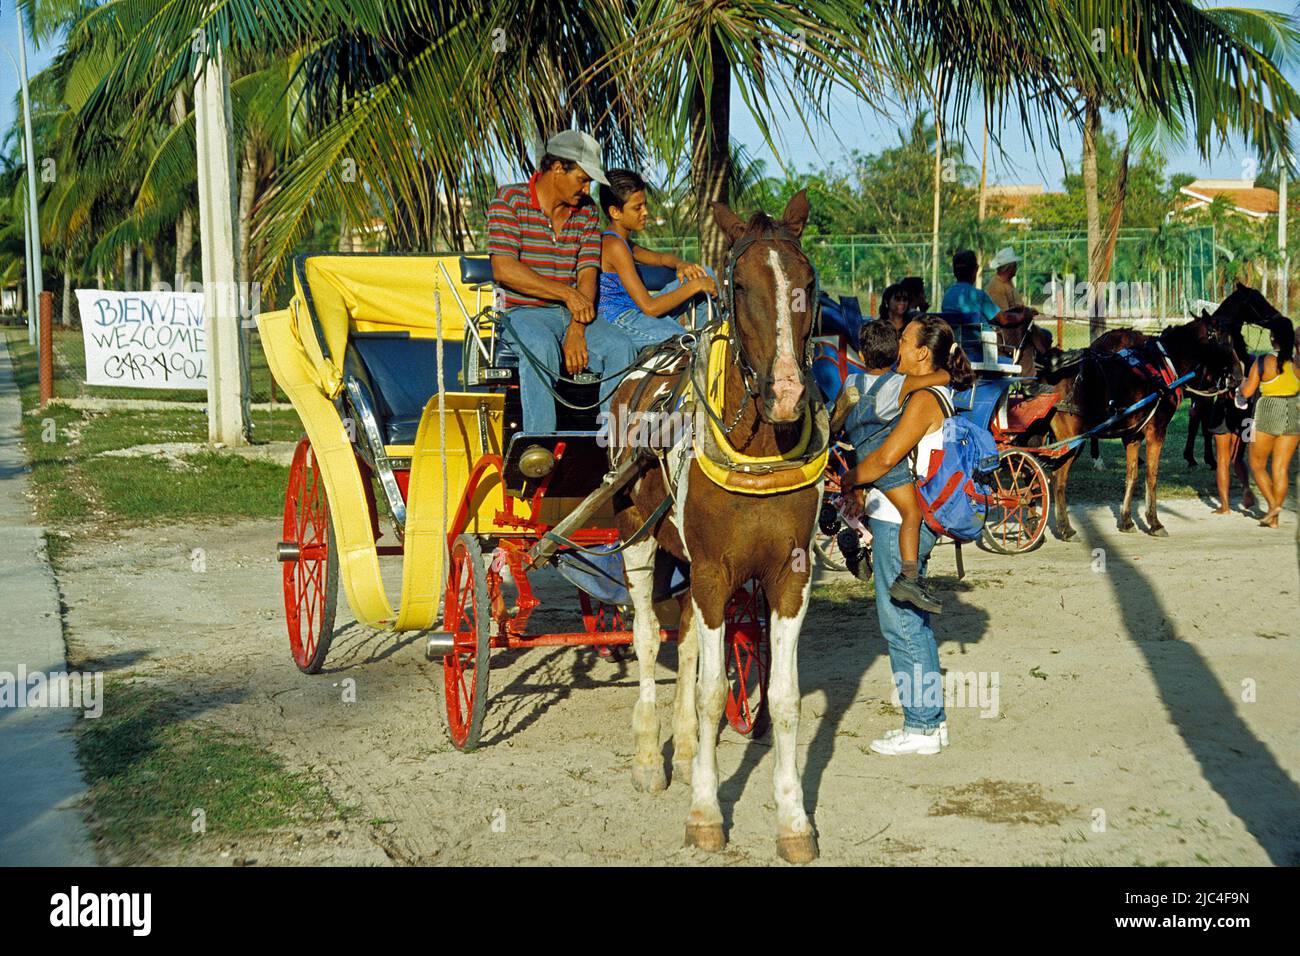 Cuban people on a horse-drawn carriage, popular transport, St. Lucia, Cuba, Caribbean Stock Photo